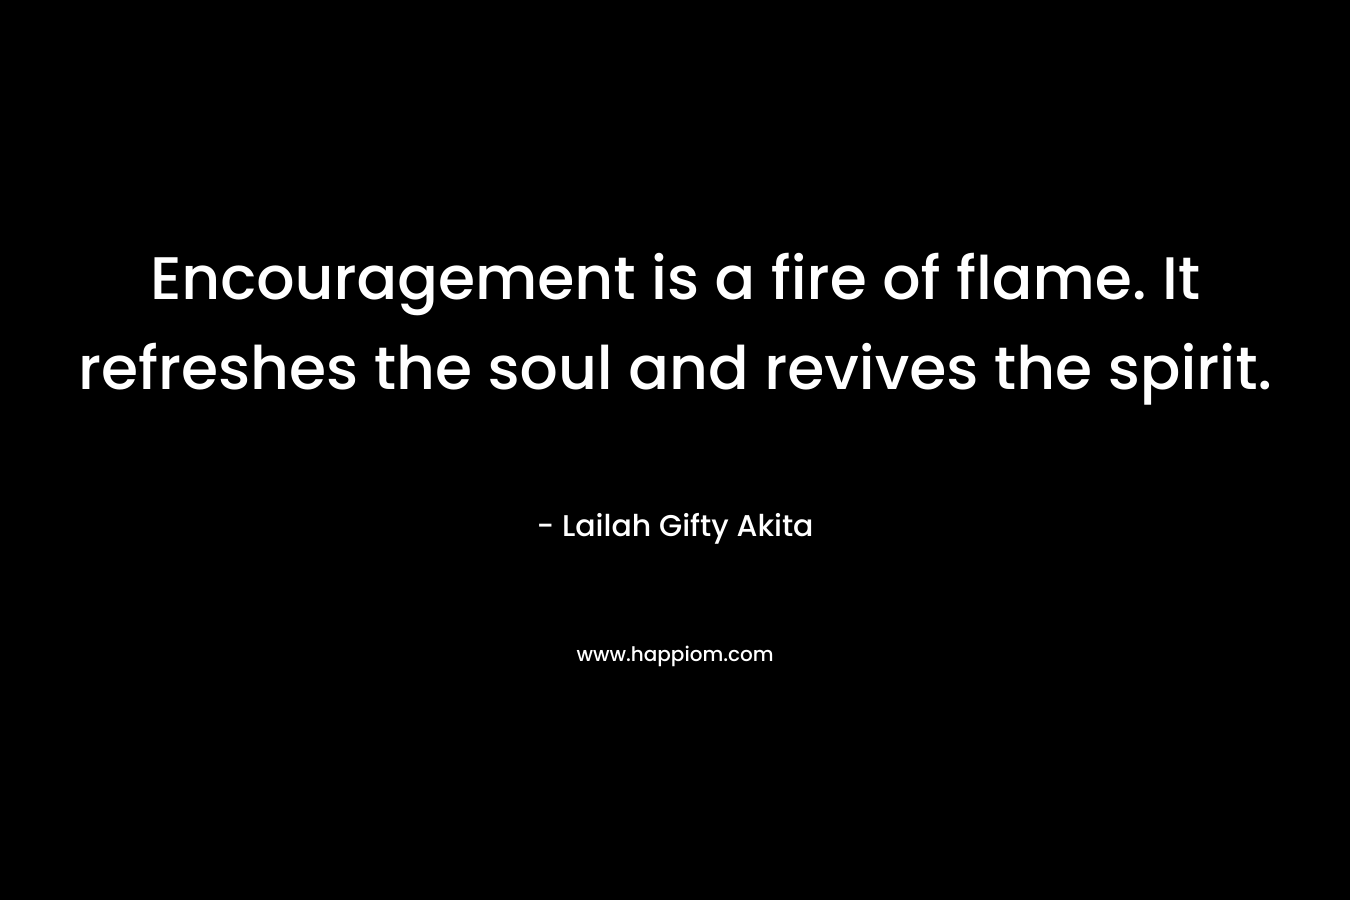 Encouragement is a fire of flame. It refreshes the soul and revives the spirit.